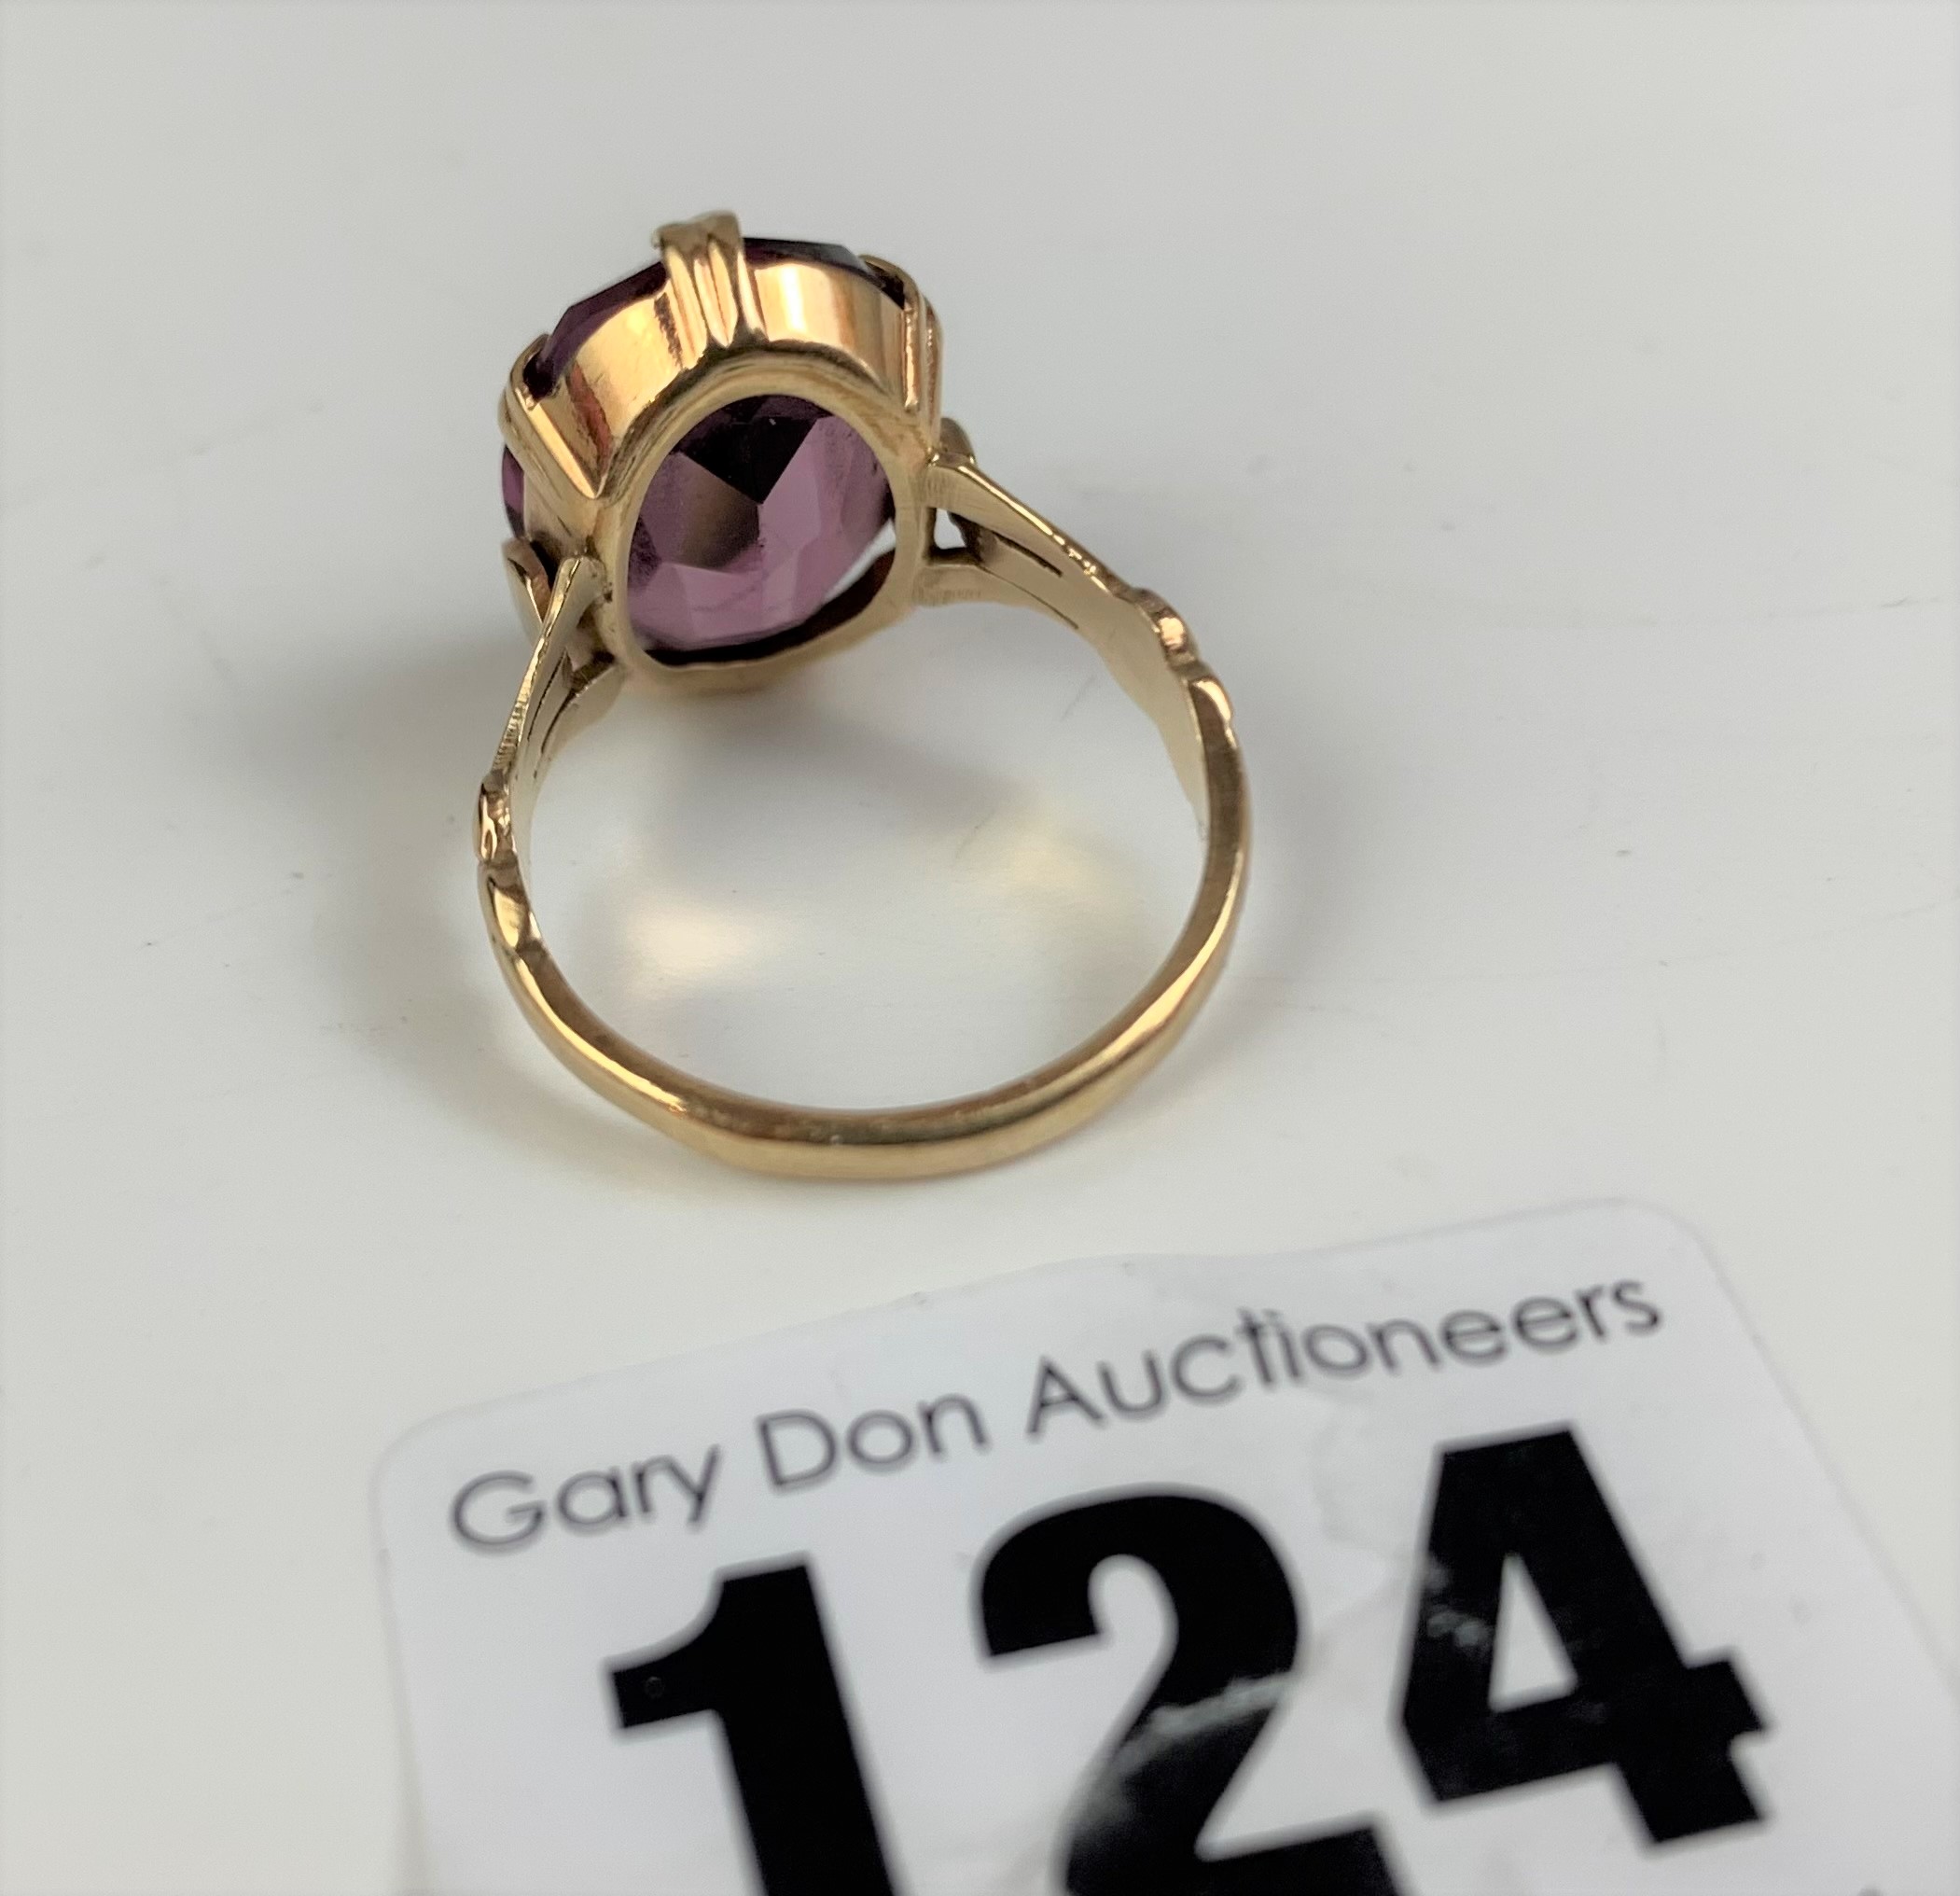 9k gold and pink stone ring, size M, w: 3.9 gms - Image 4 of 6